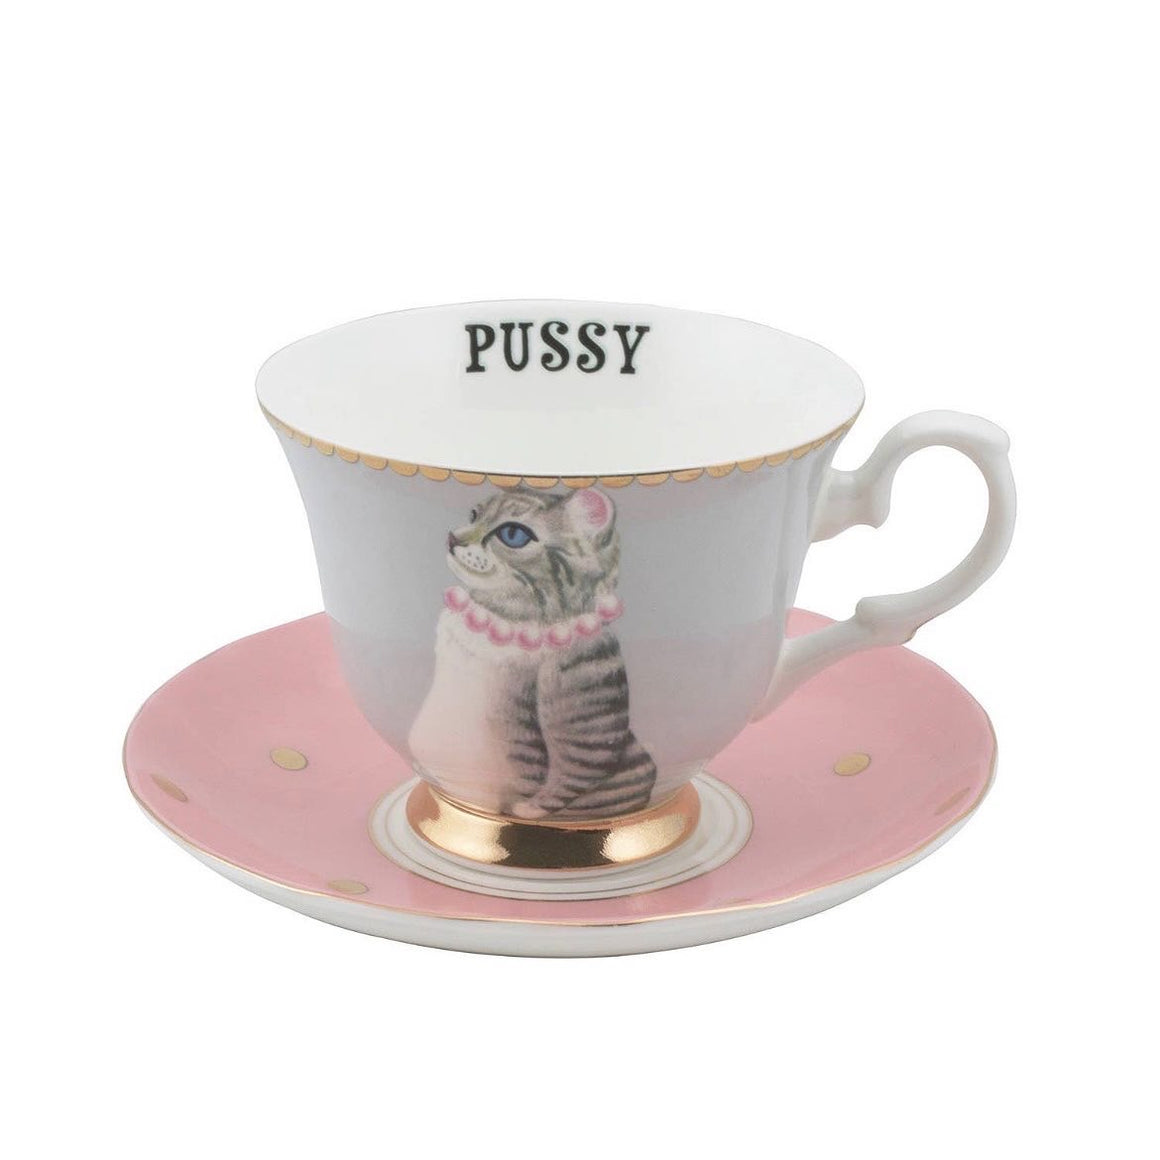 PUSSY TEACUP AND SAUCER